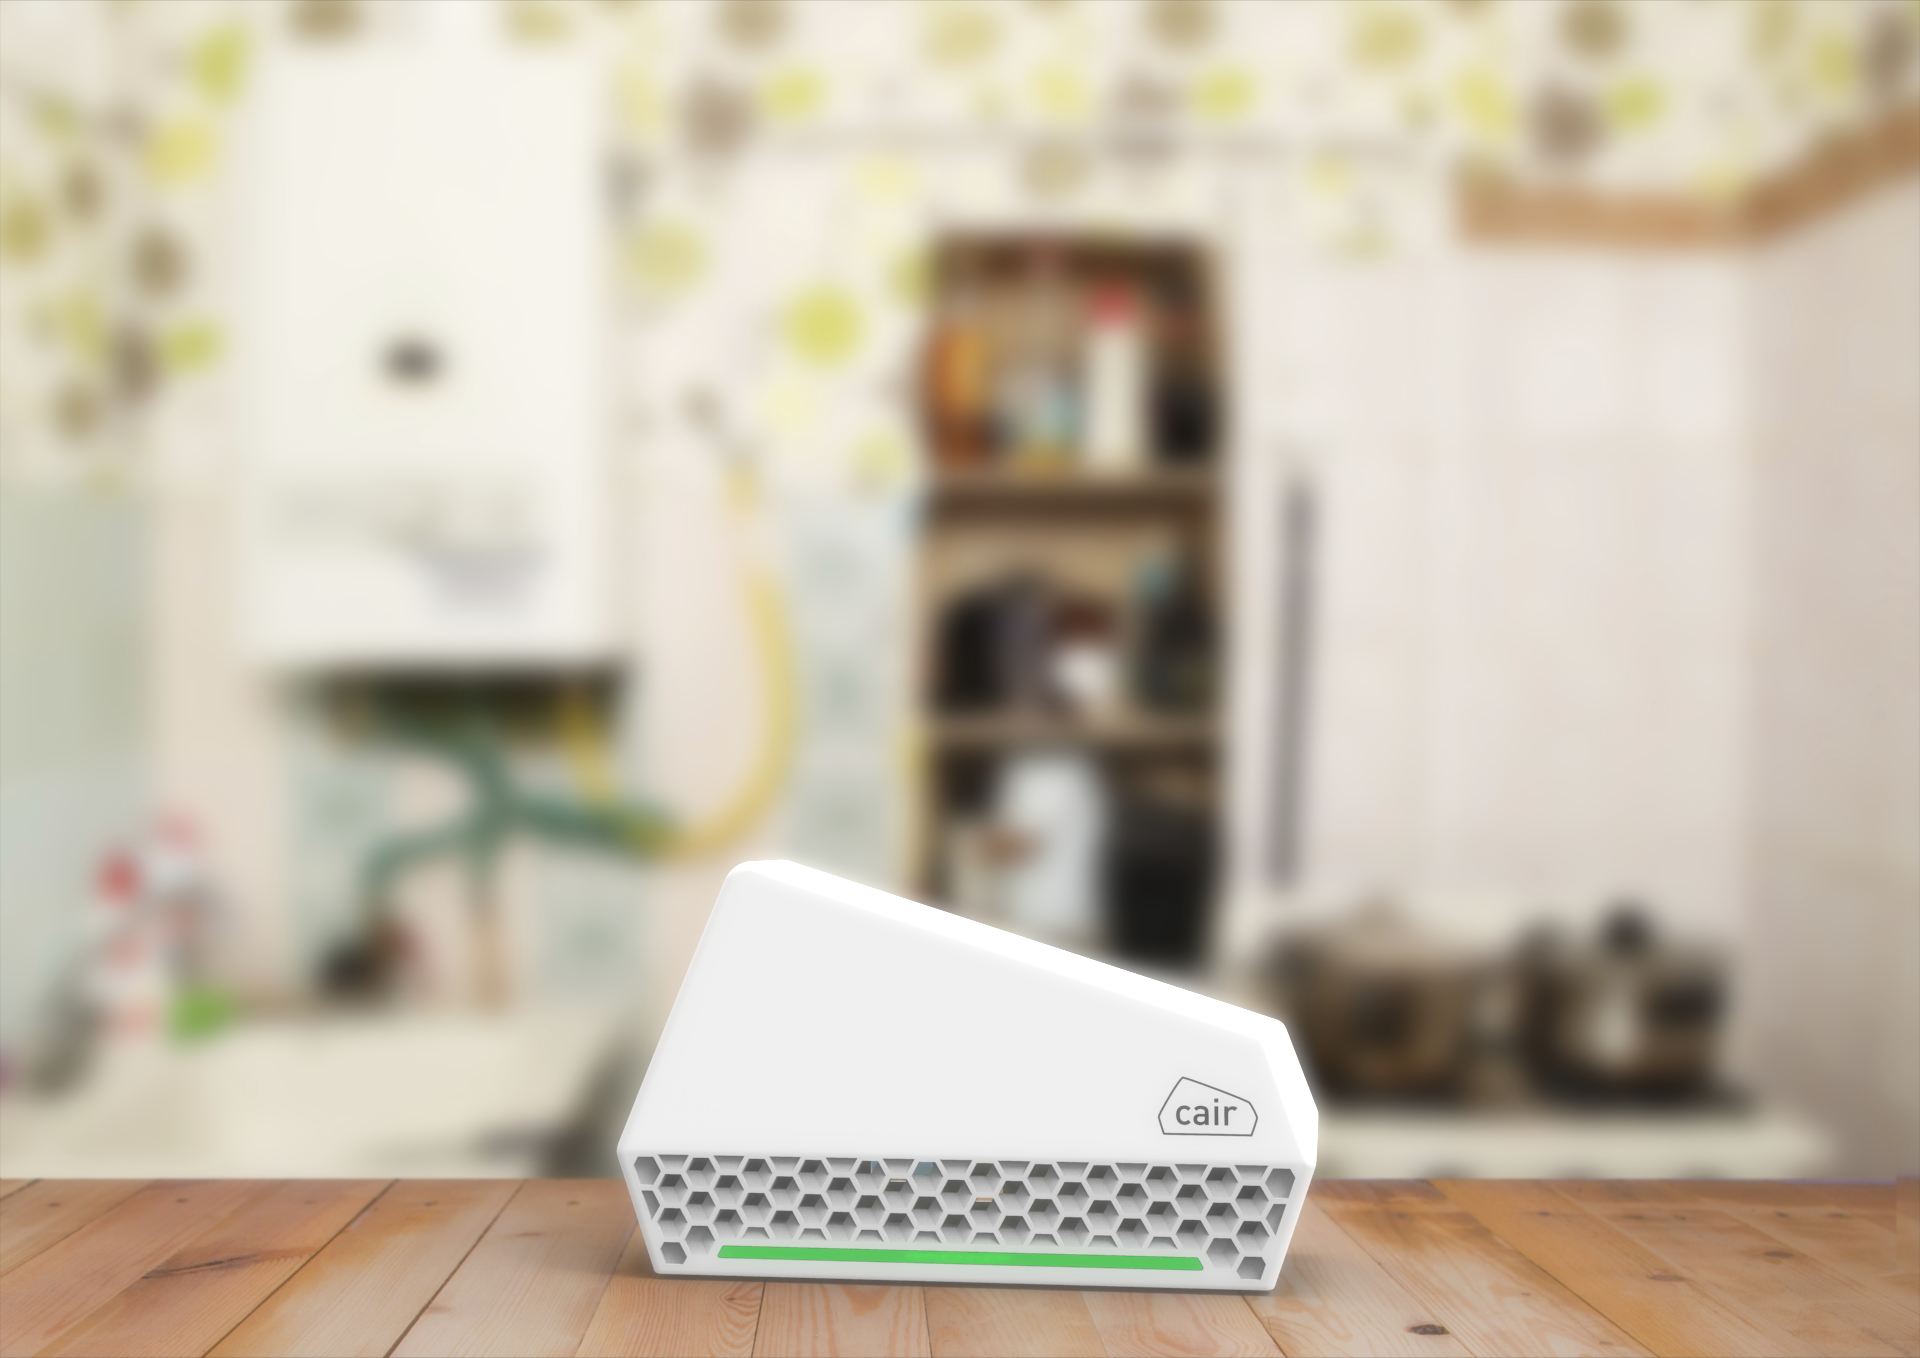 Nuwave Cair - Smart Air Quality Monitor